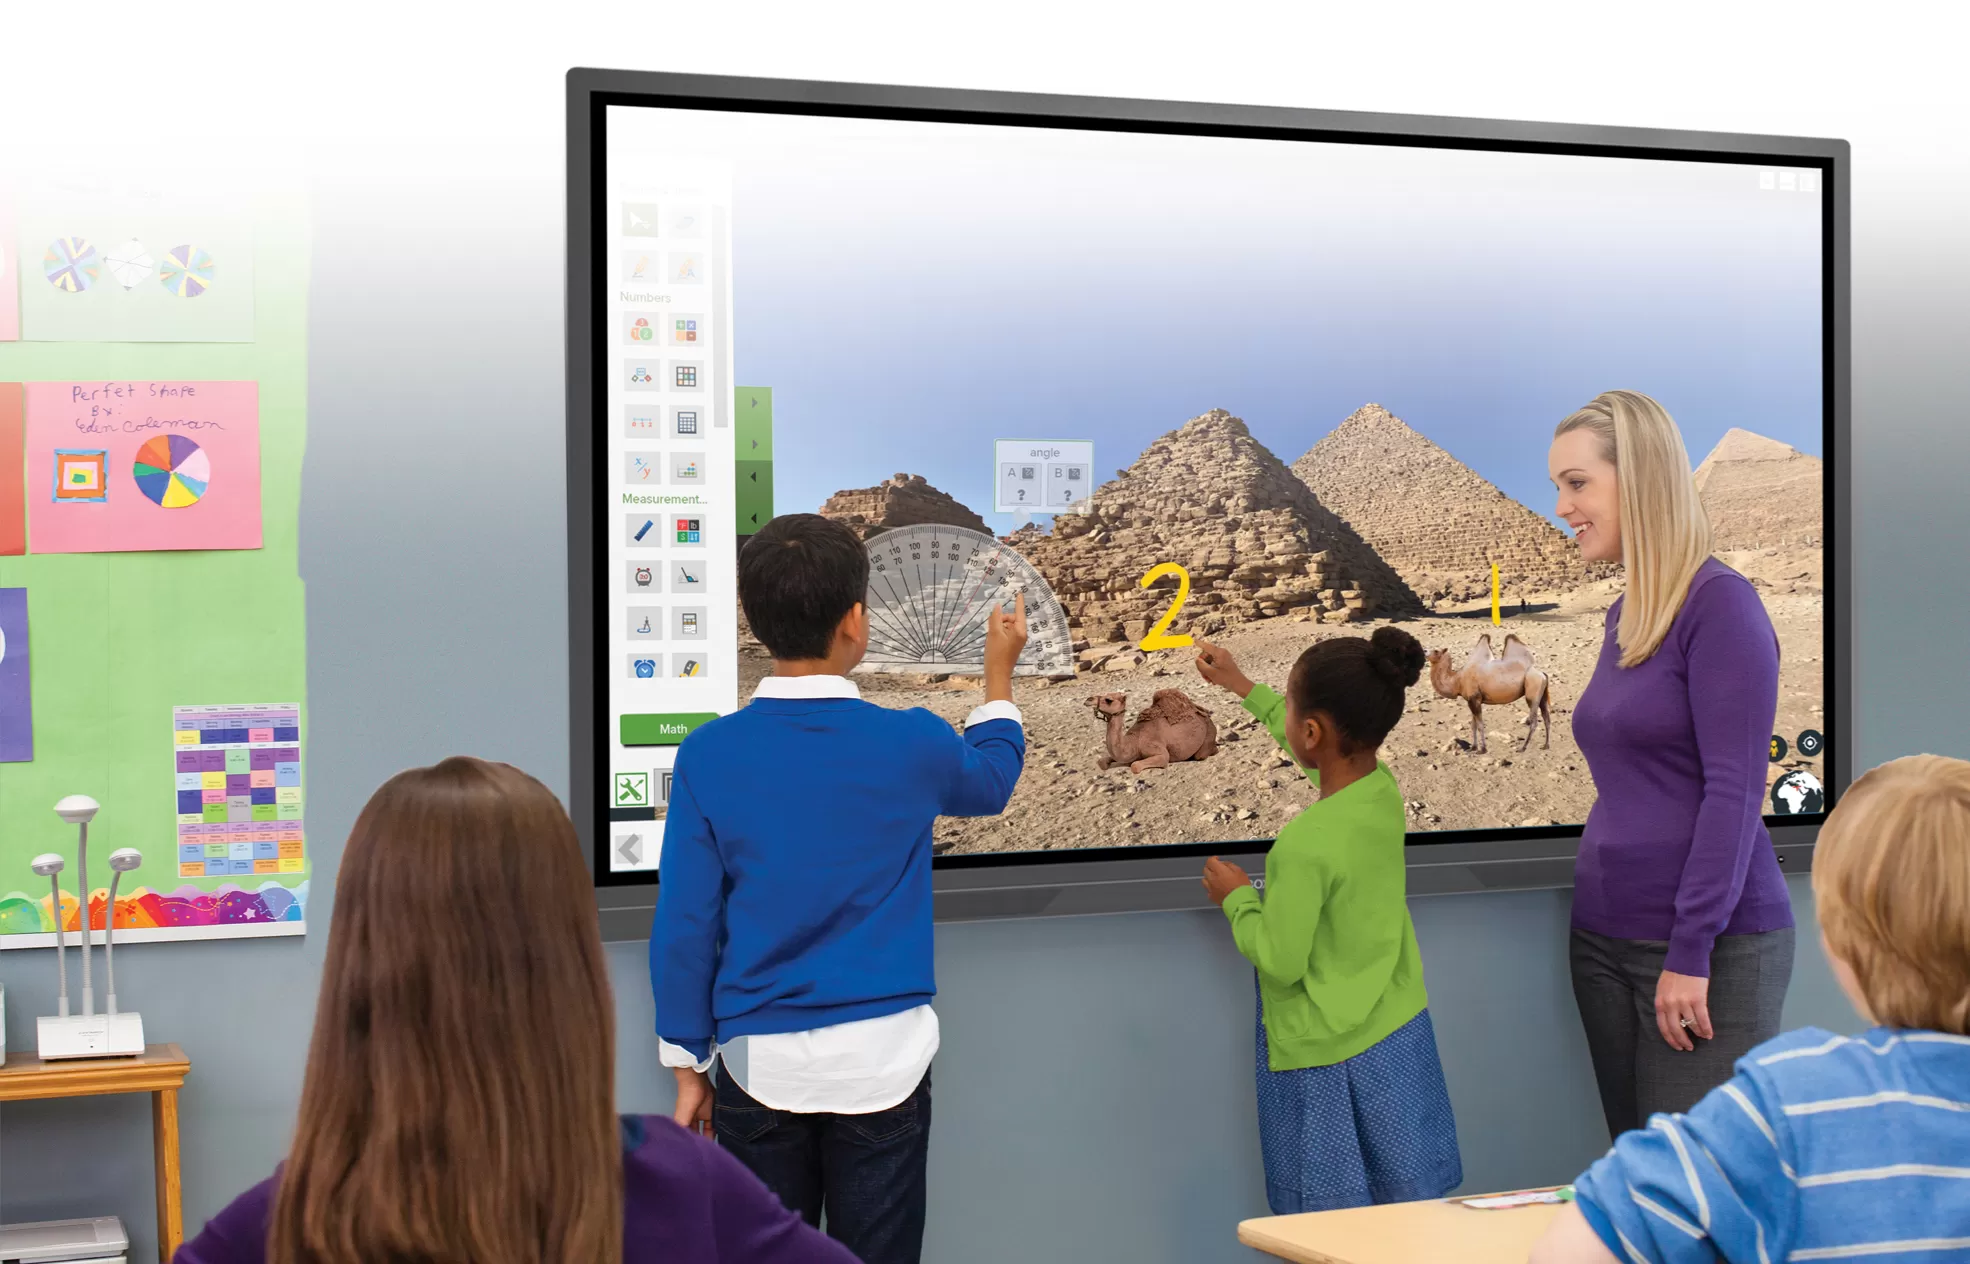 Students using Apps for the classroom on an interactive screen while the teacher helps